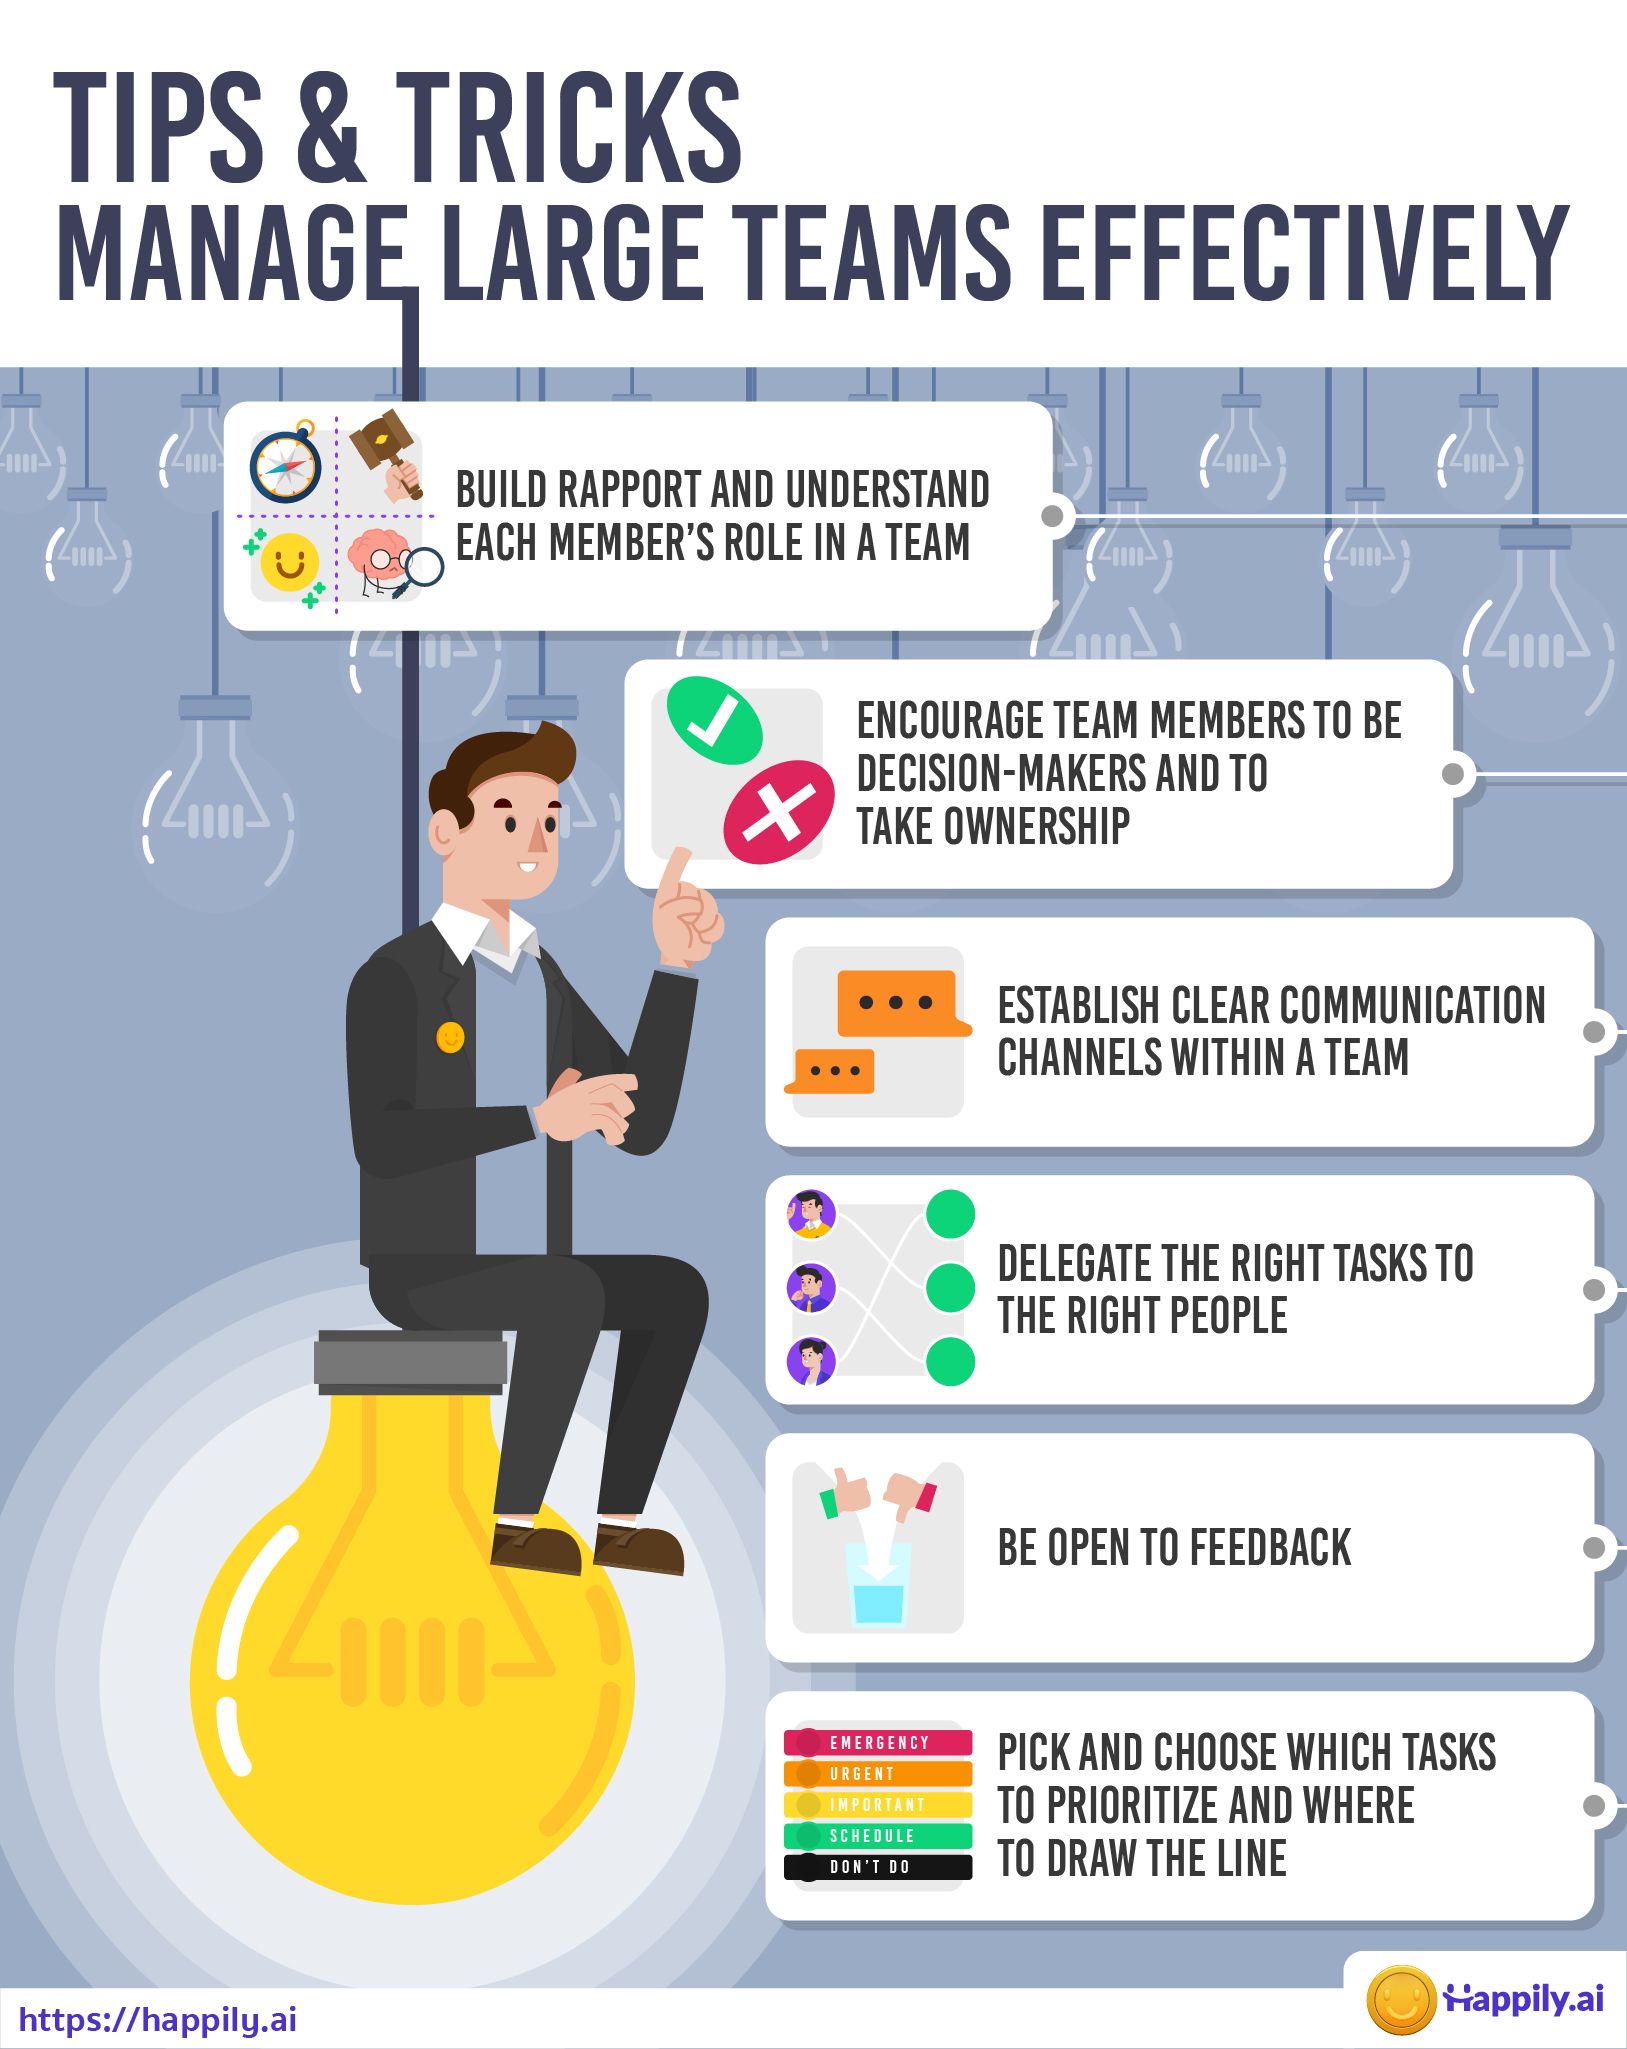 Tips and tricks to manage large teams effectively